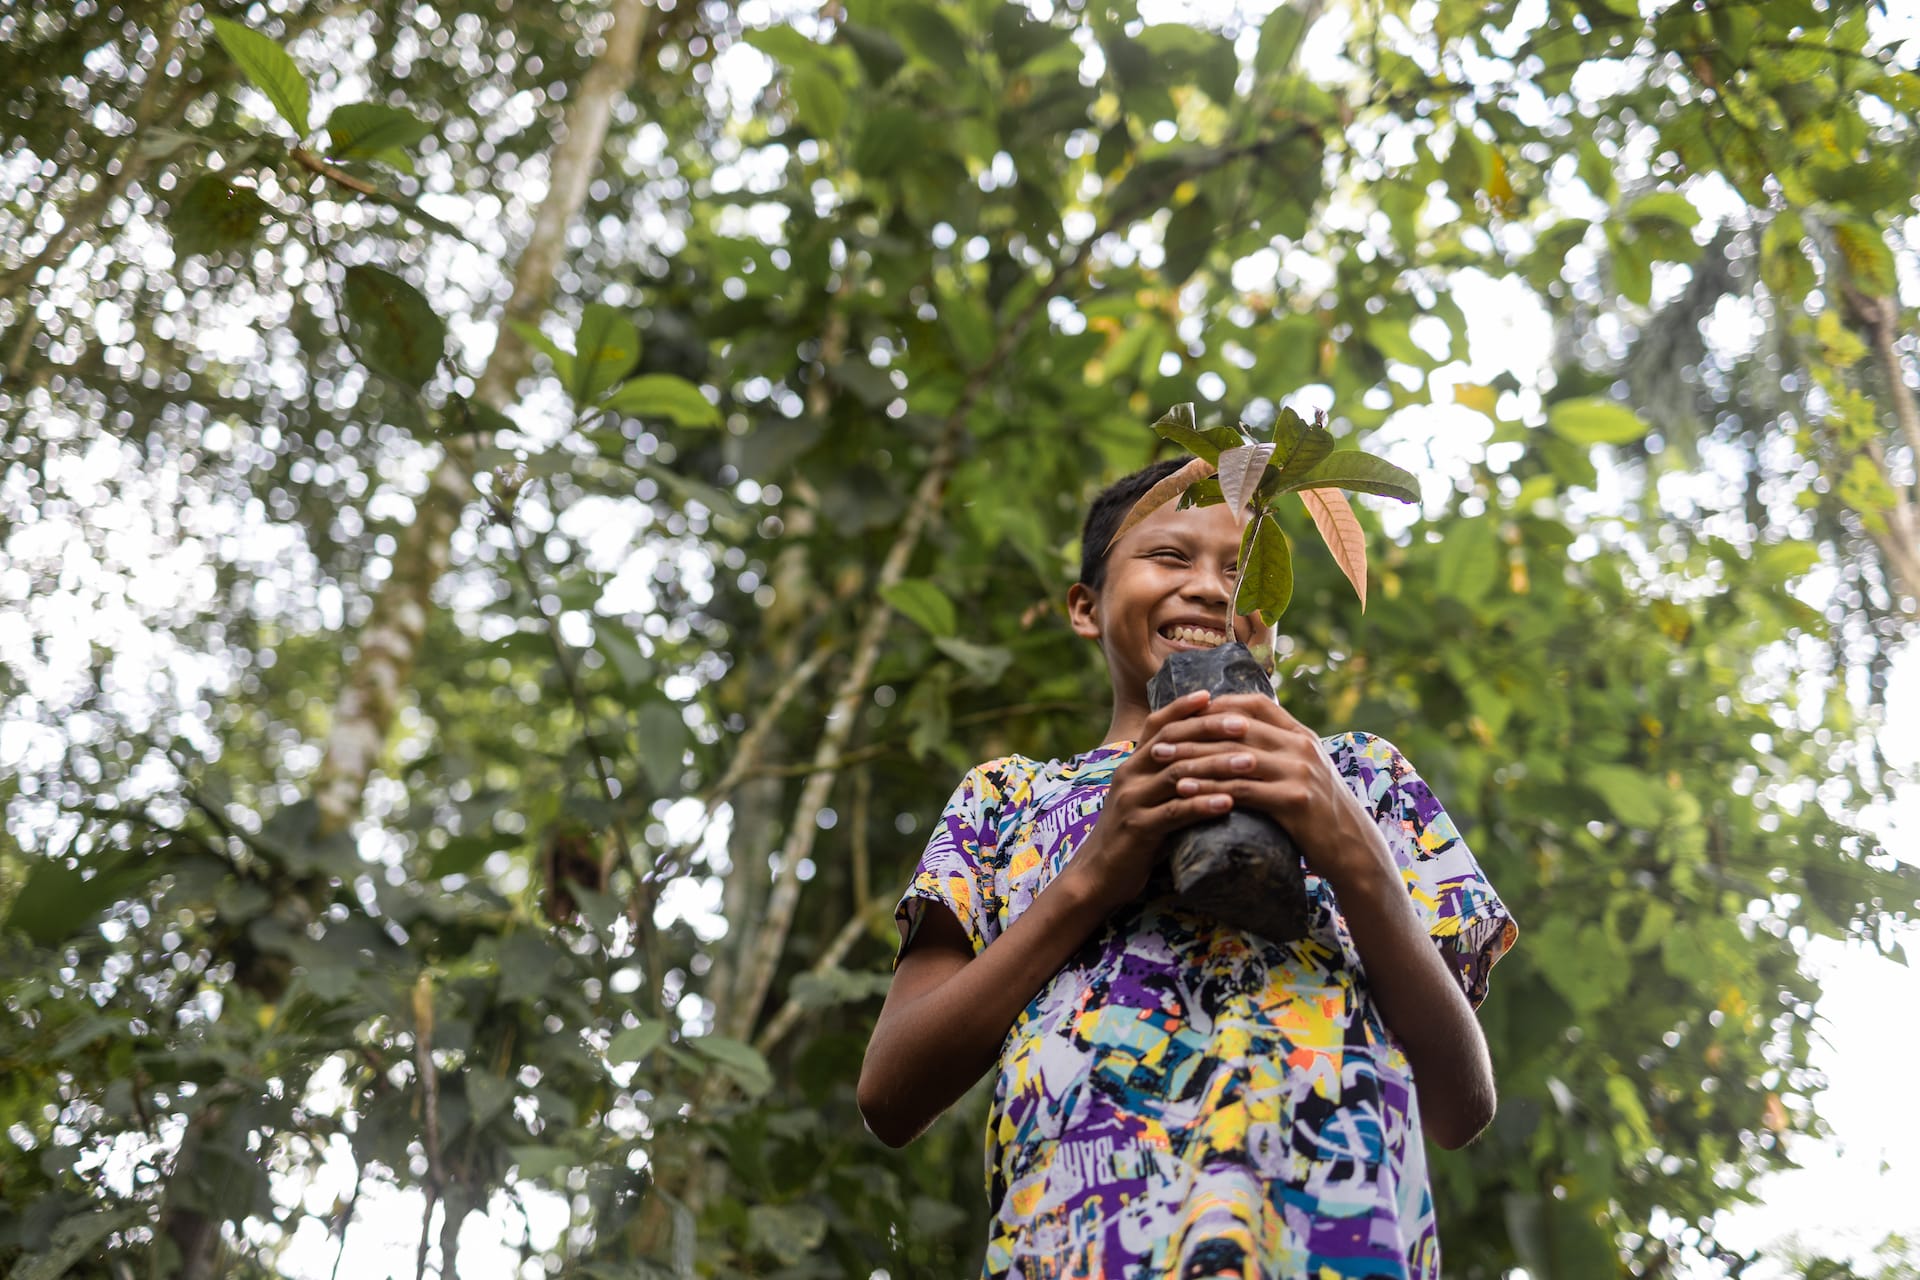 Waira, a 12-year-old boy in Ecuador, is standing in the jungle laughing and holding a plant.